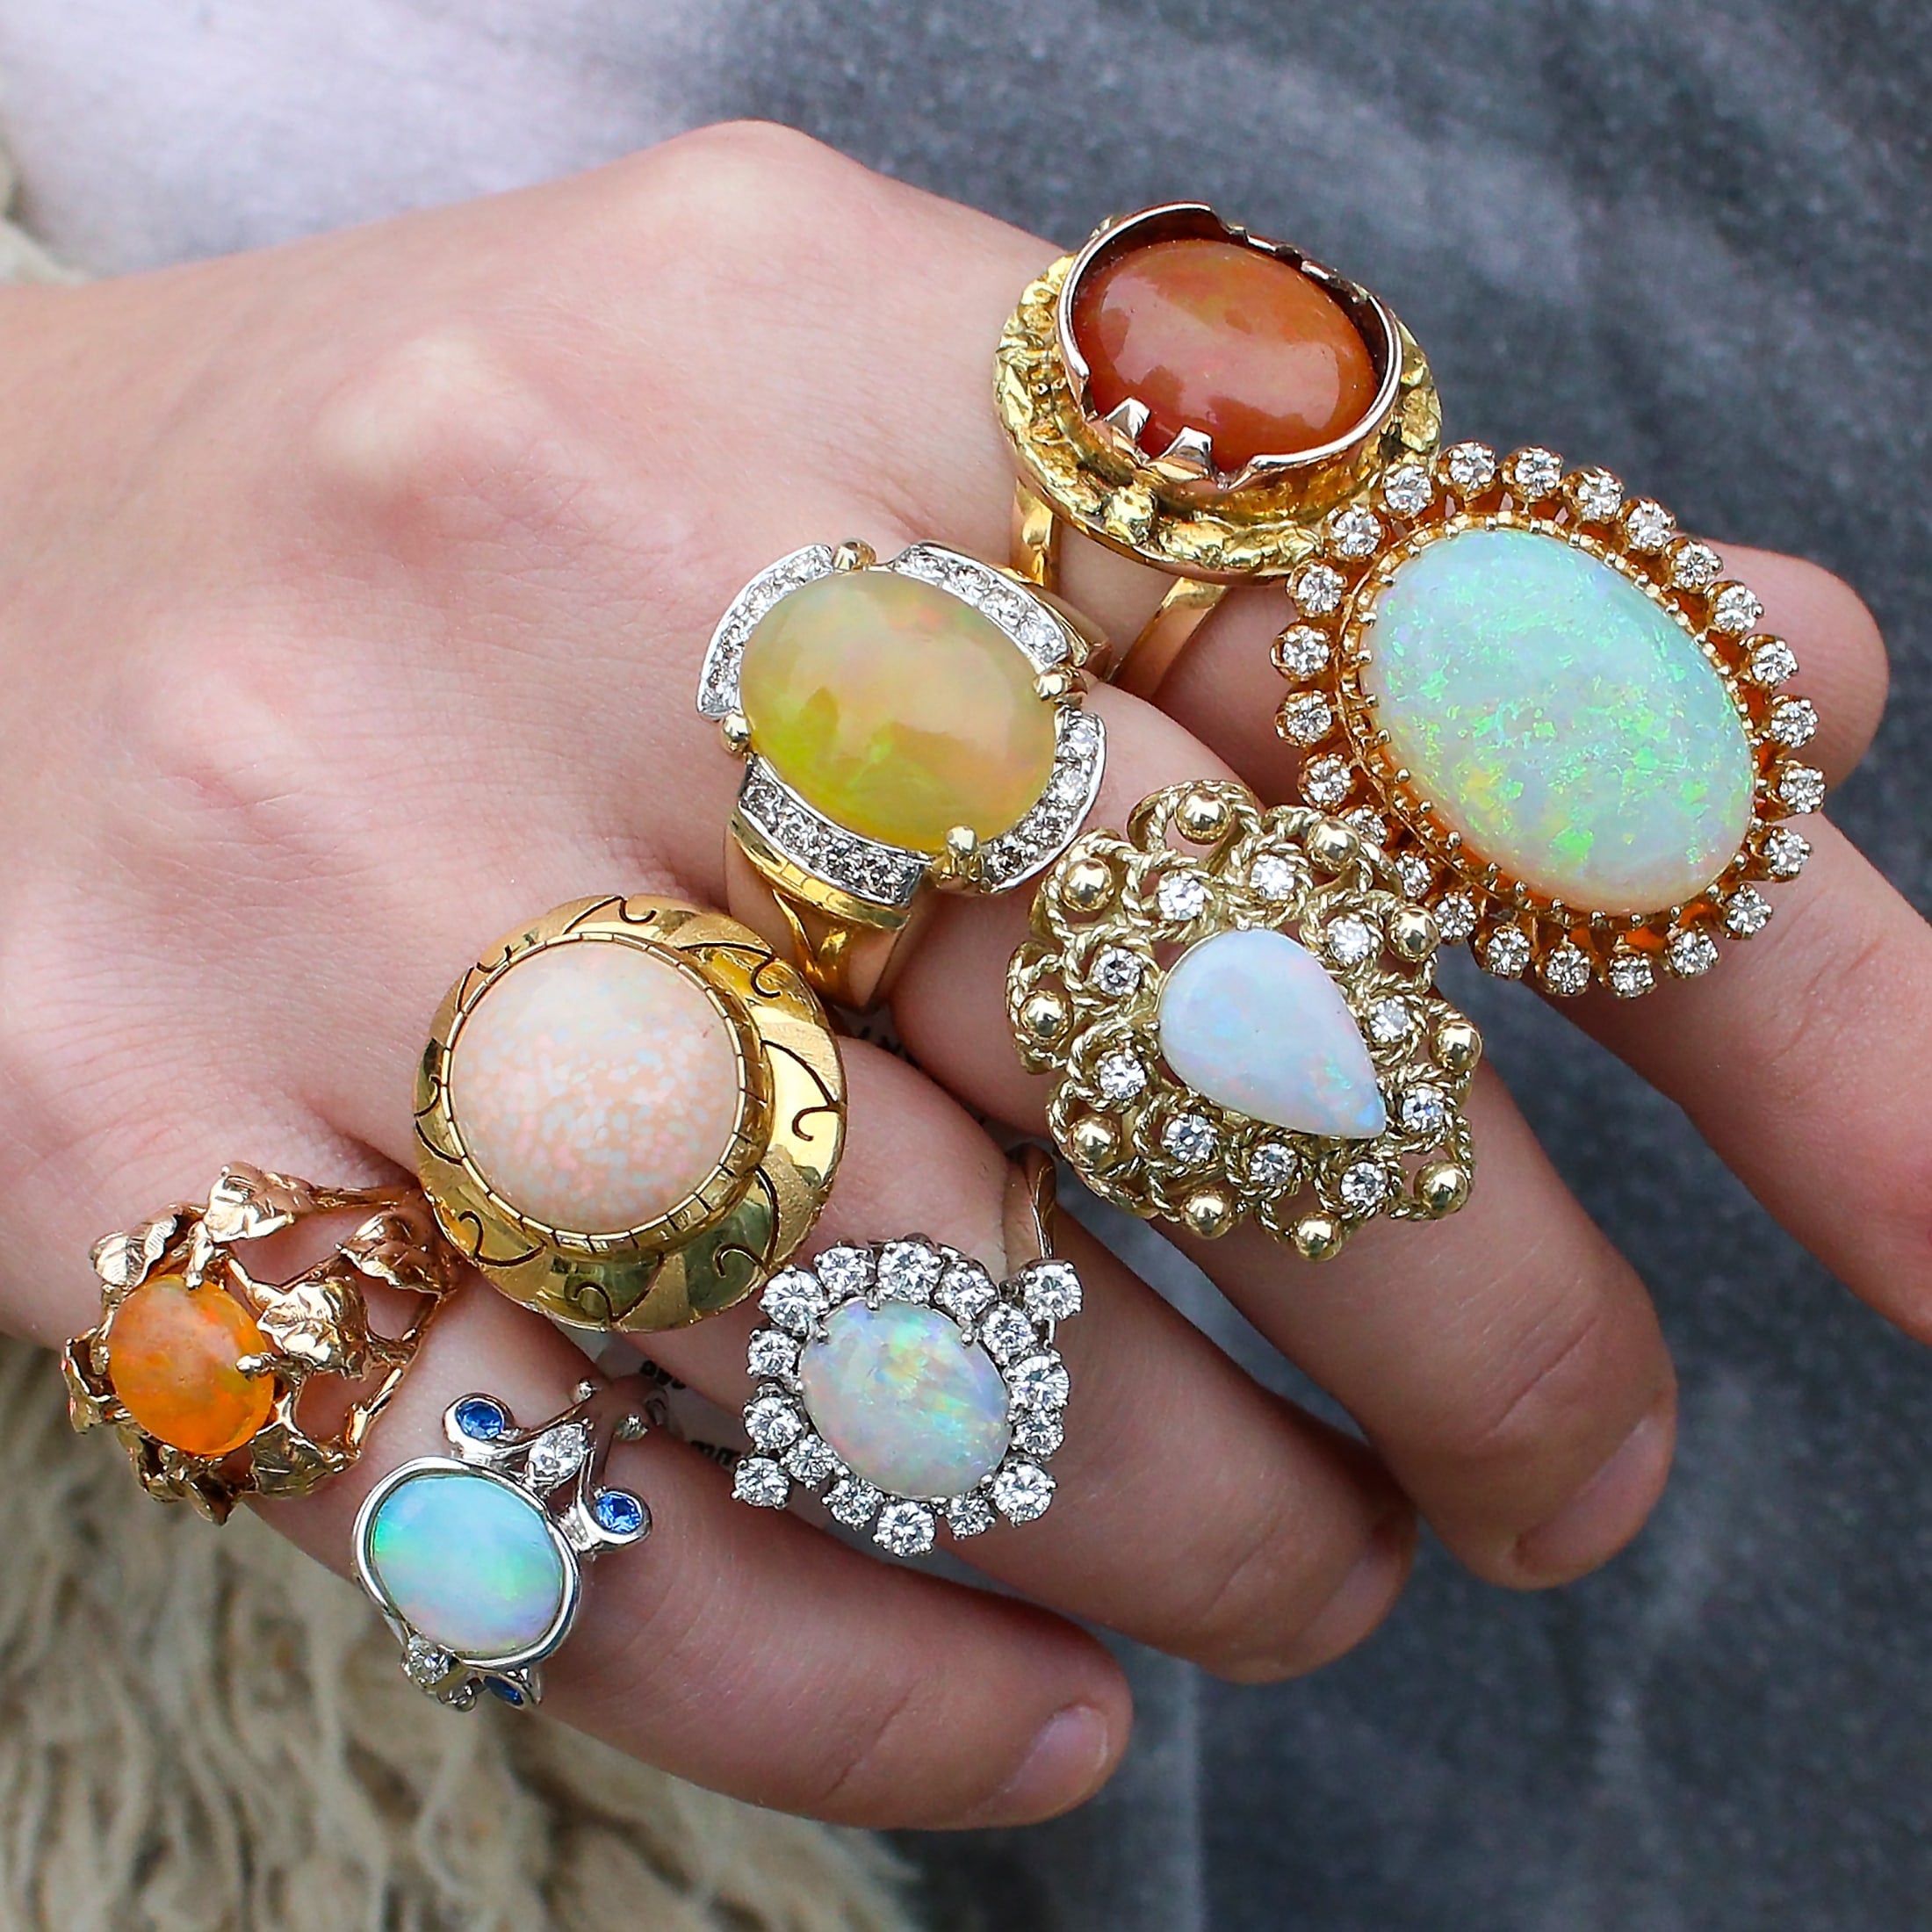 Woman Wearing Different Type Of Opal Stone Rings